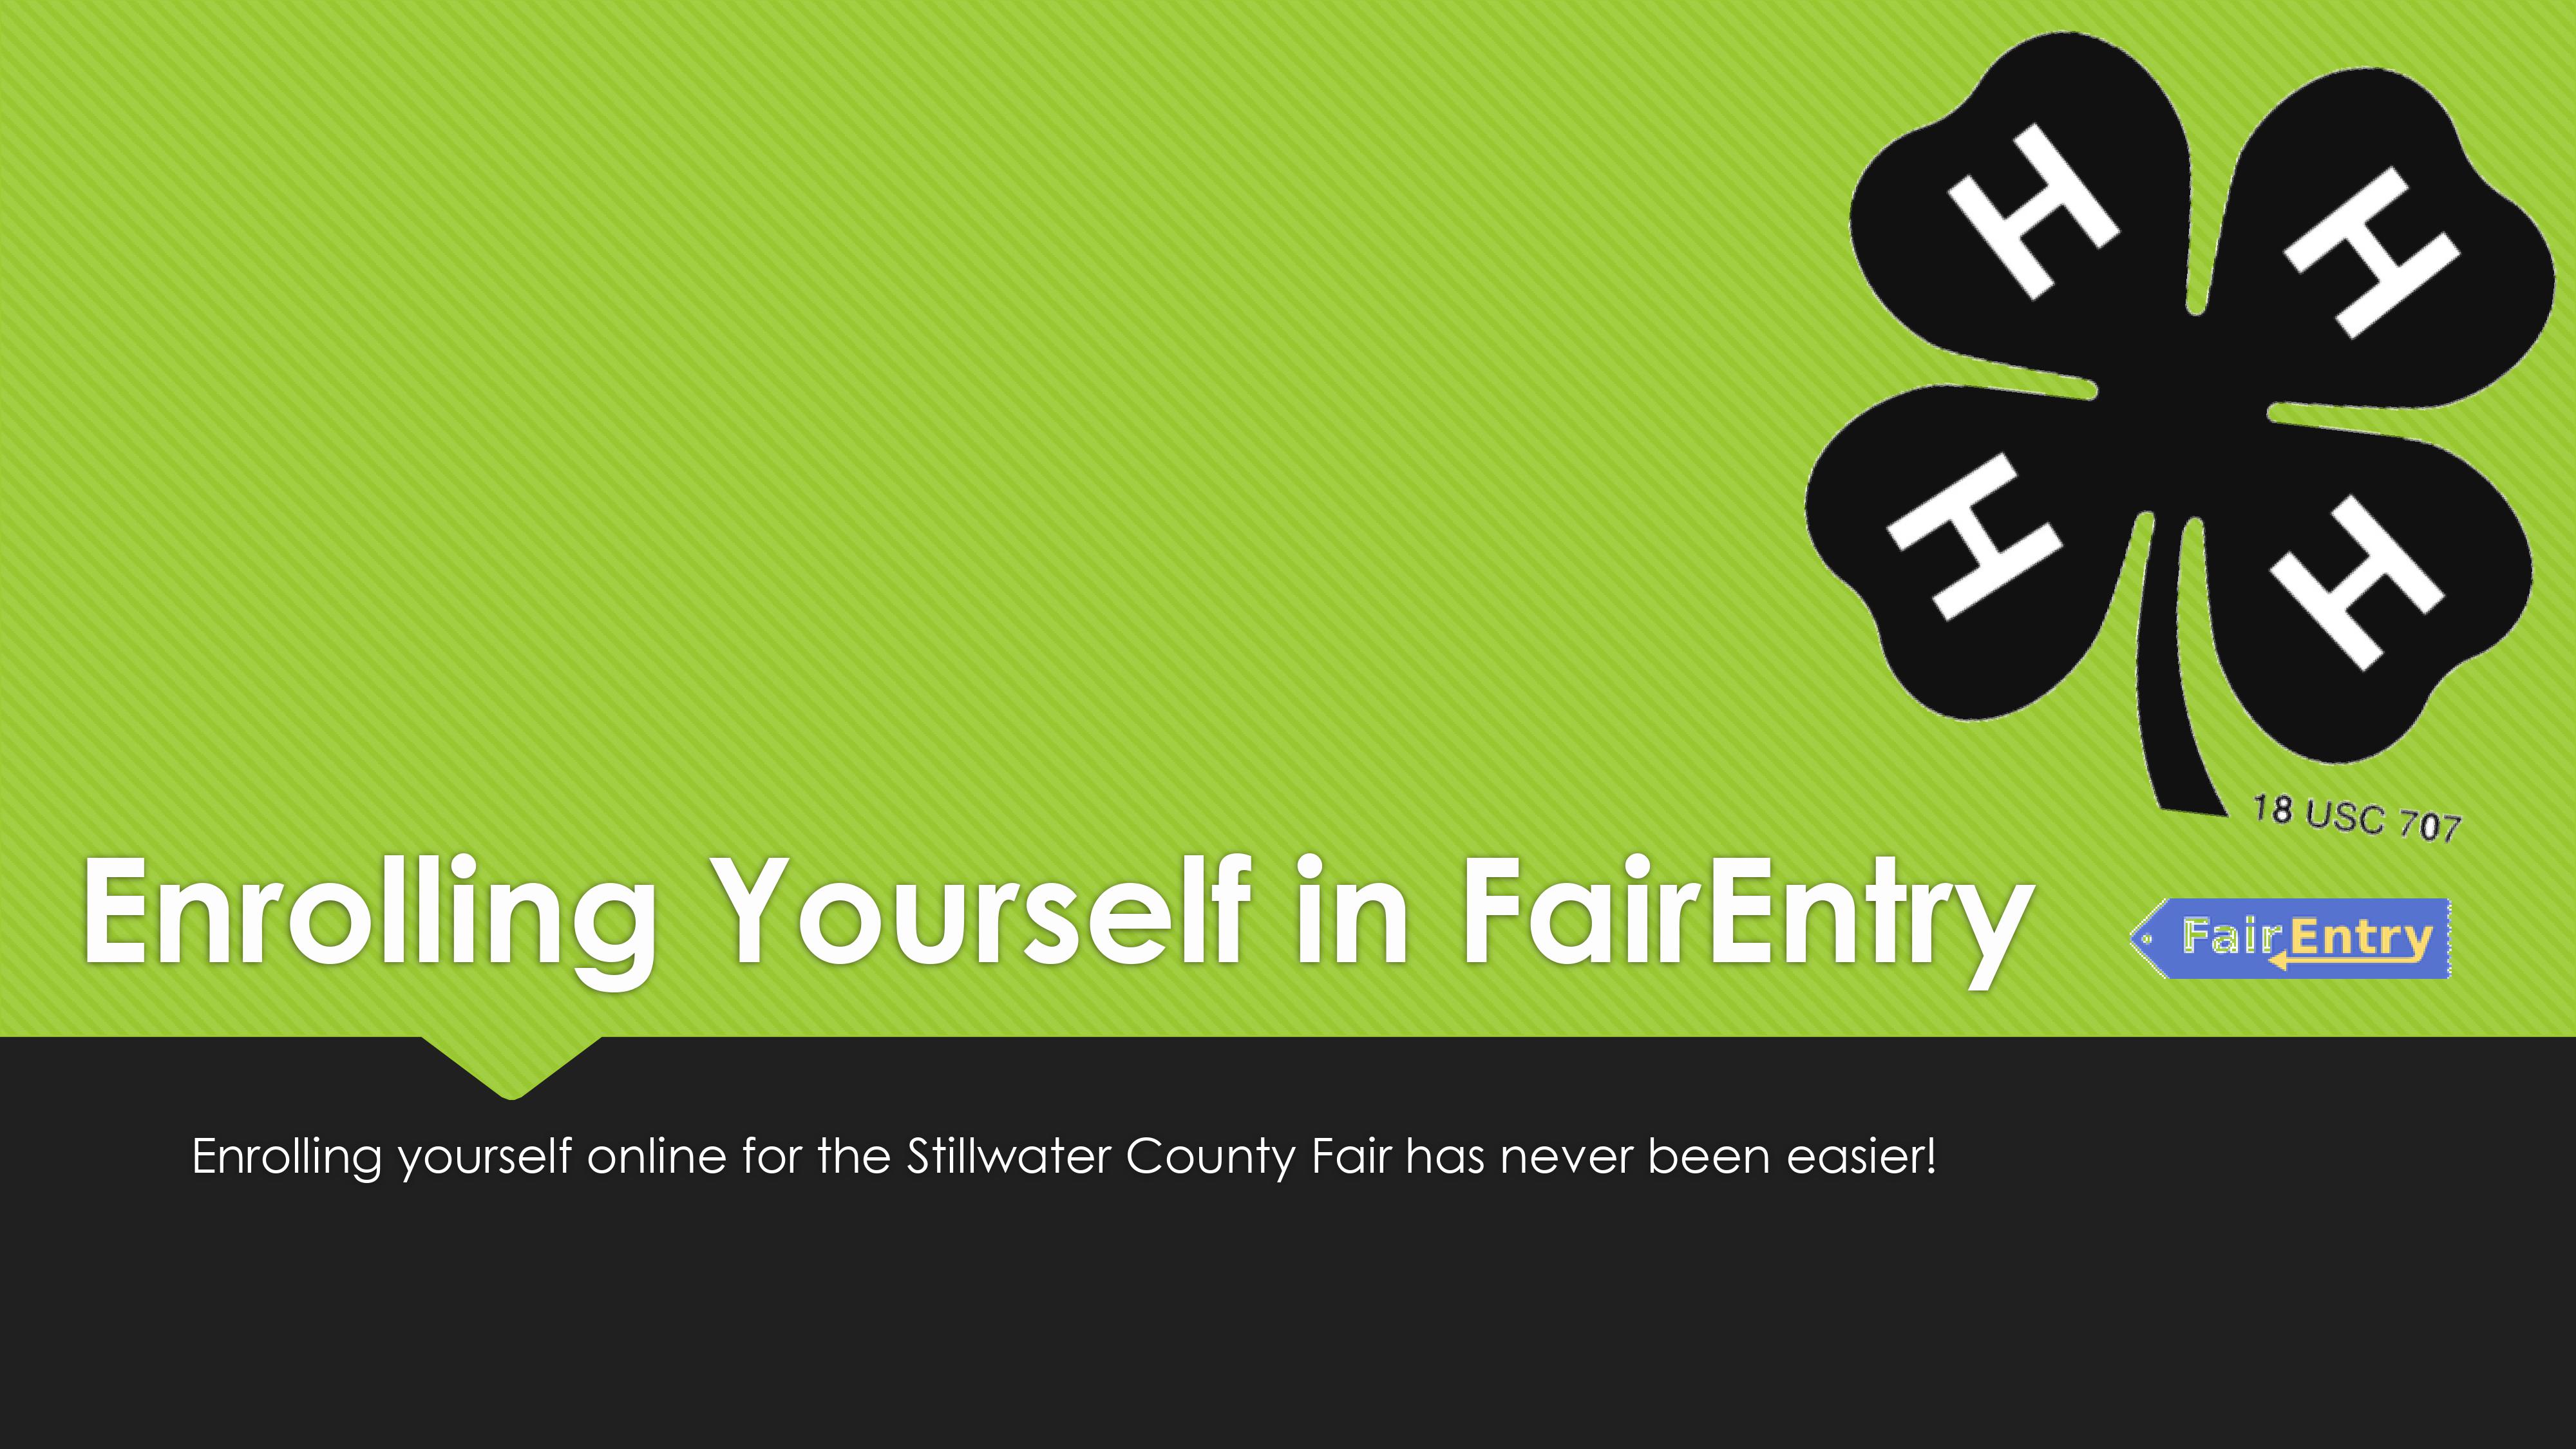 Enrolling yourself in Fair Entry